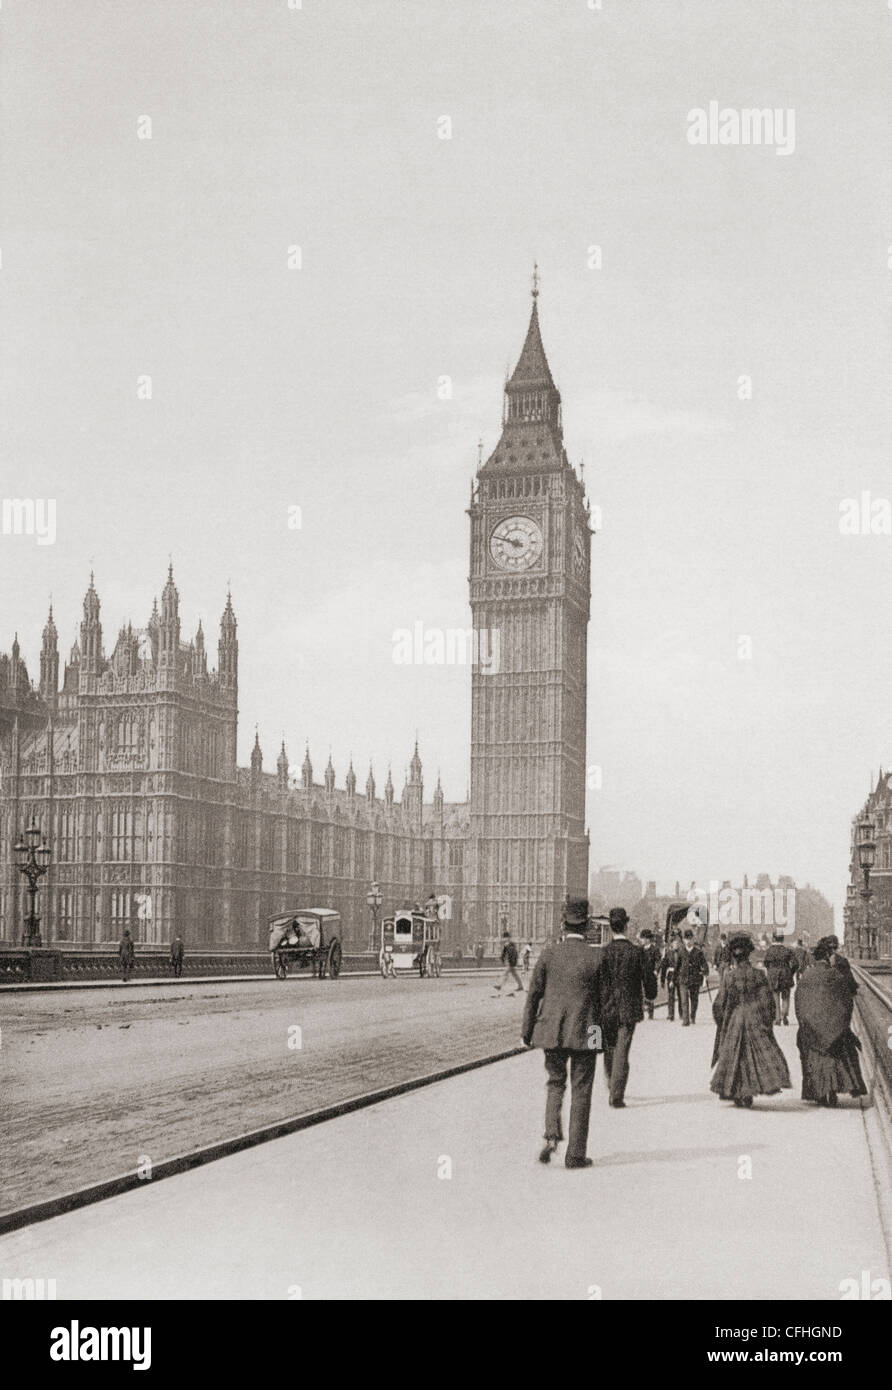 The Palace of Westminster, aka the Houses of Parliament or Westminster Palace, London, England in the late 19th century. Stock Photo